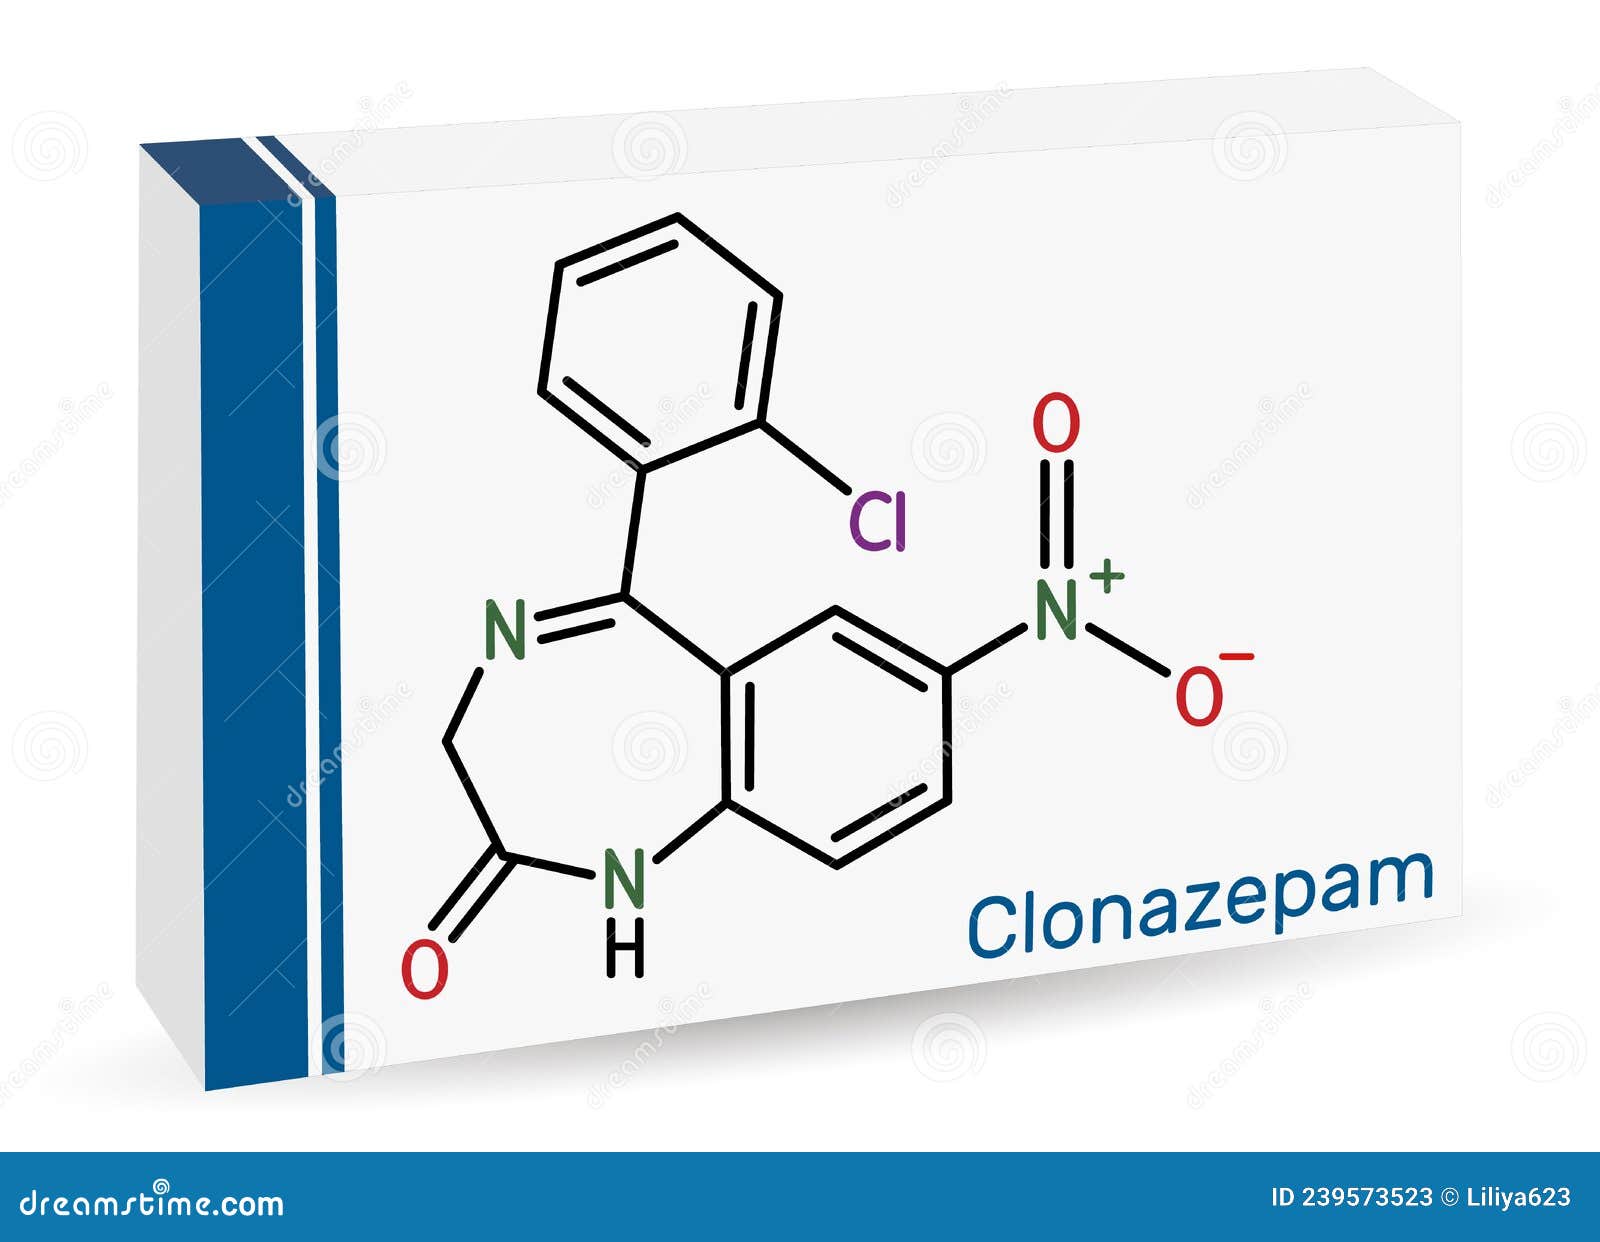 clonazepam molecule. it is benzodiazepine, anticonvulsant, used to treat panic disorders, severe anxiety, seizures. skeletal